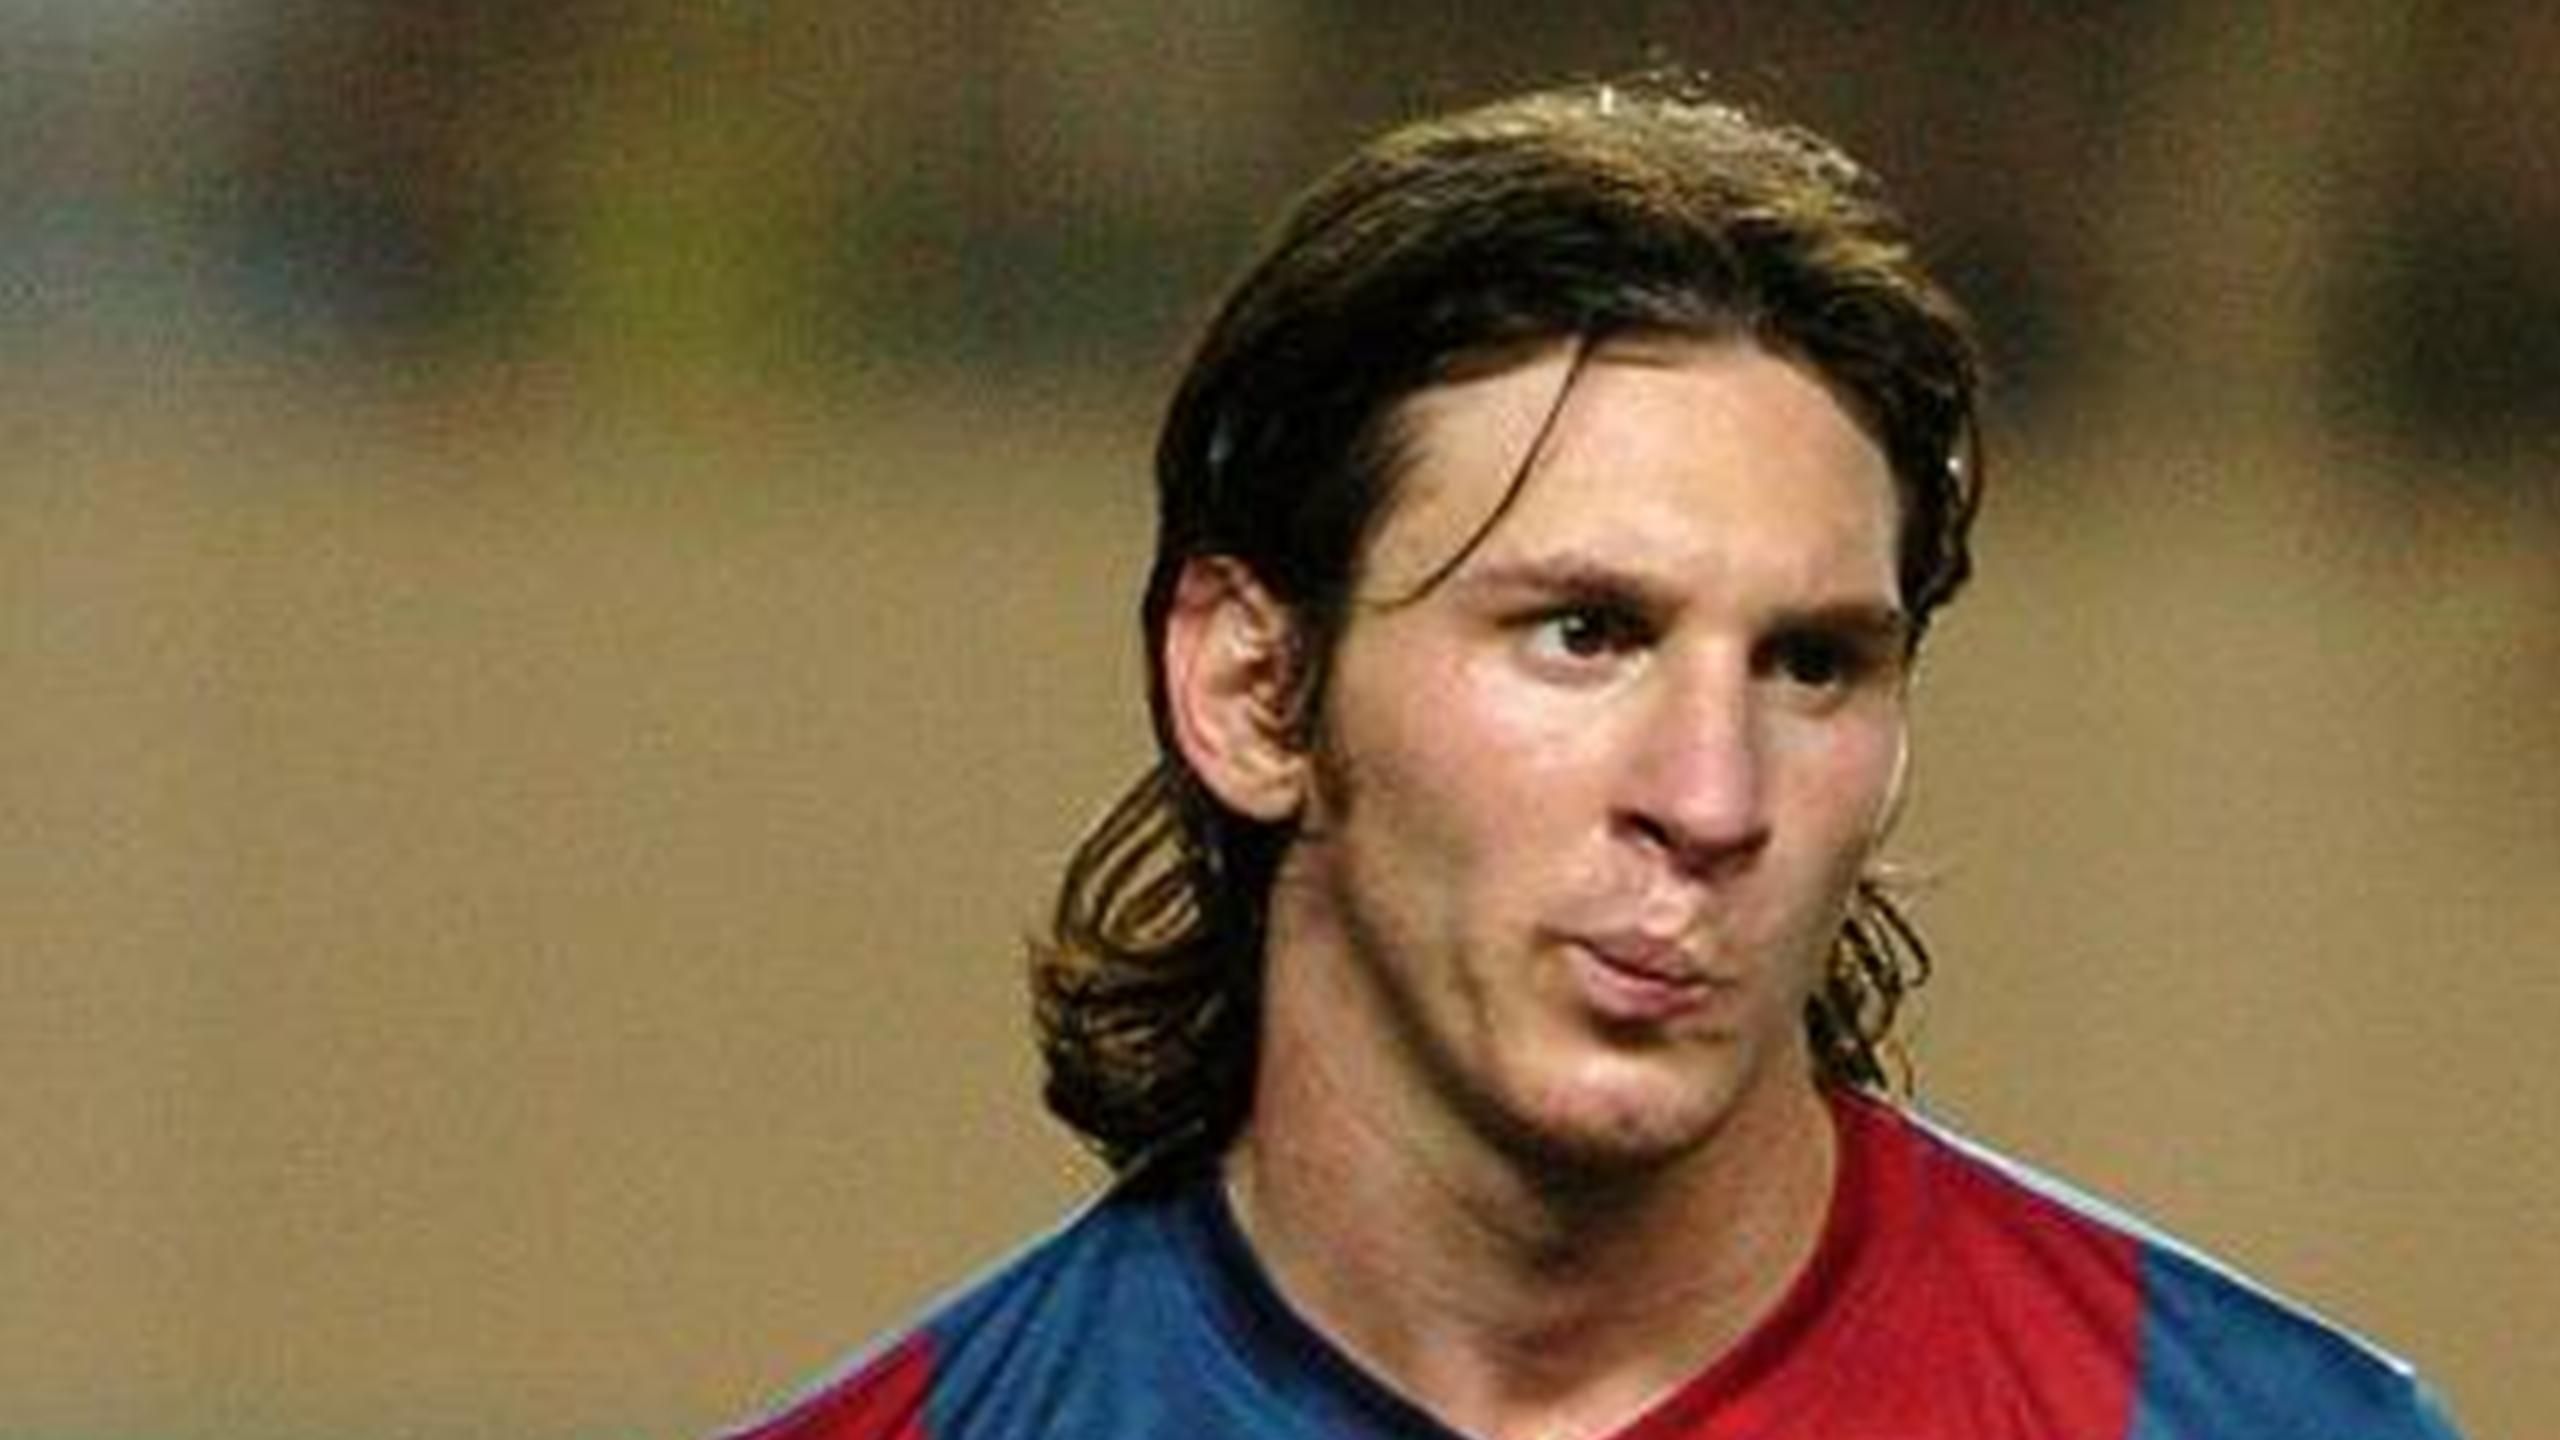 When did Lionel Messi have long hair? - Quora